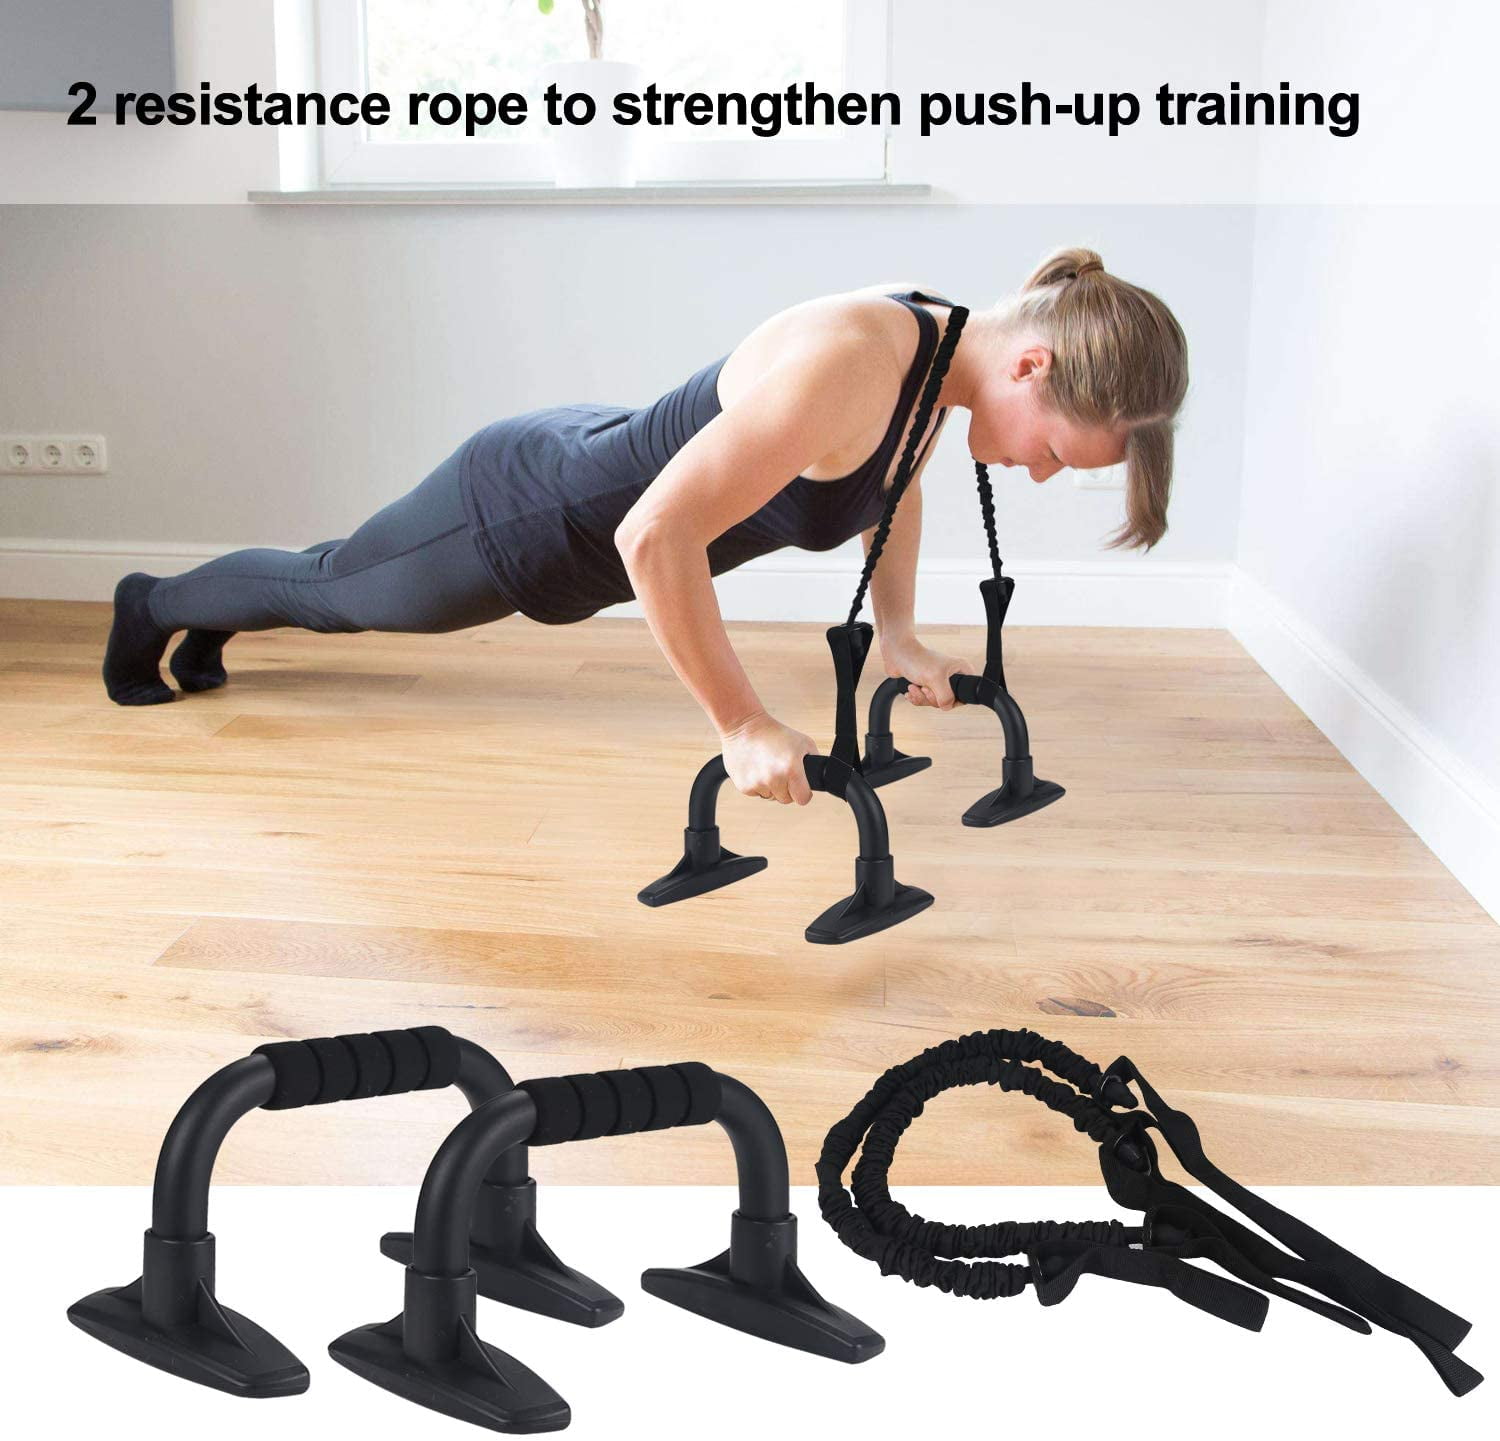 6-in-1 AB Roller Wheel Kit Abdominal Wheel Trainer Set with Resistance Band Jump Rope Push-up Support and Knee Pad Perfect Home Gym Equipment for Women Men